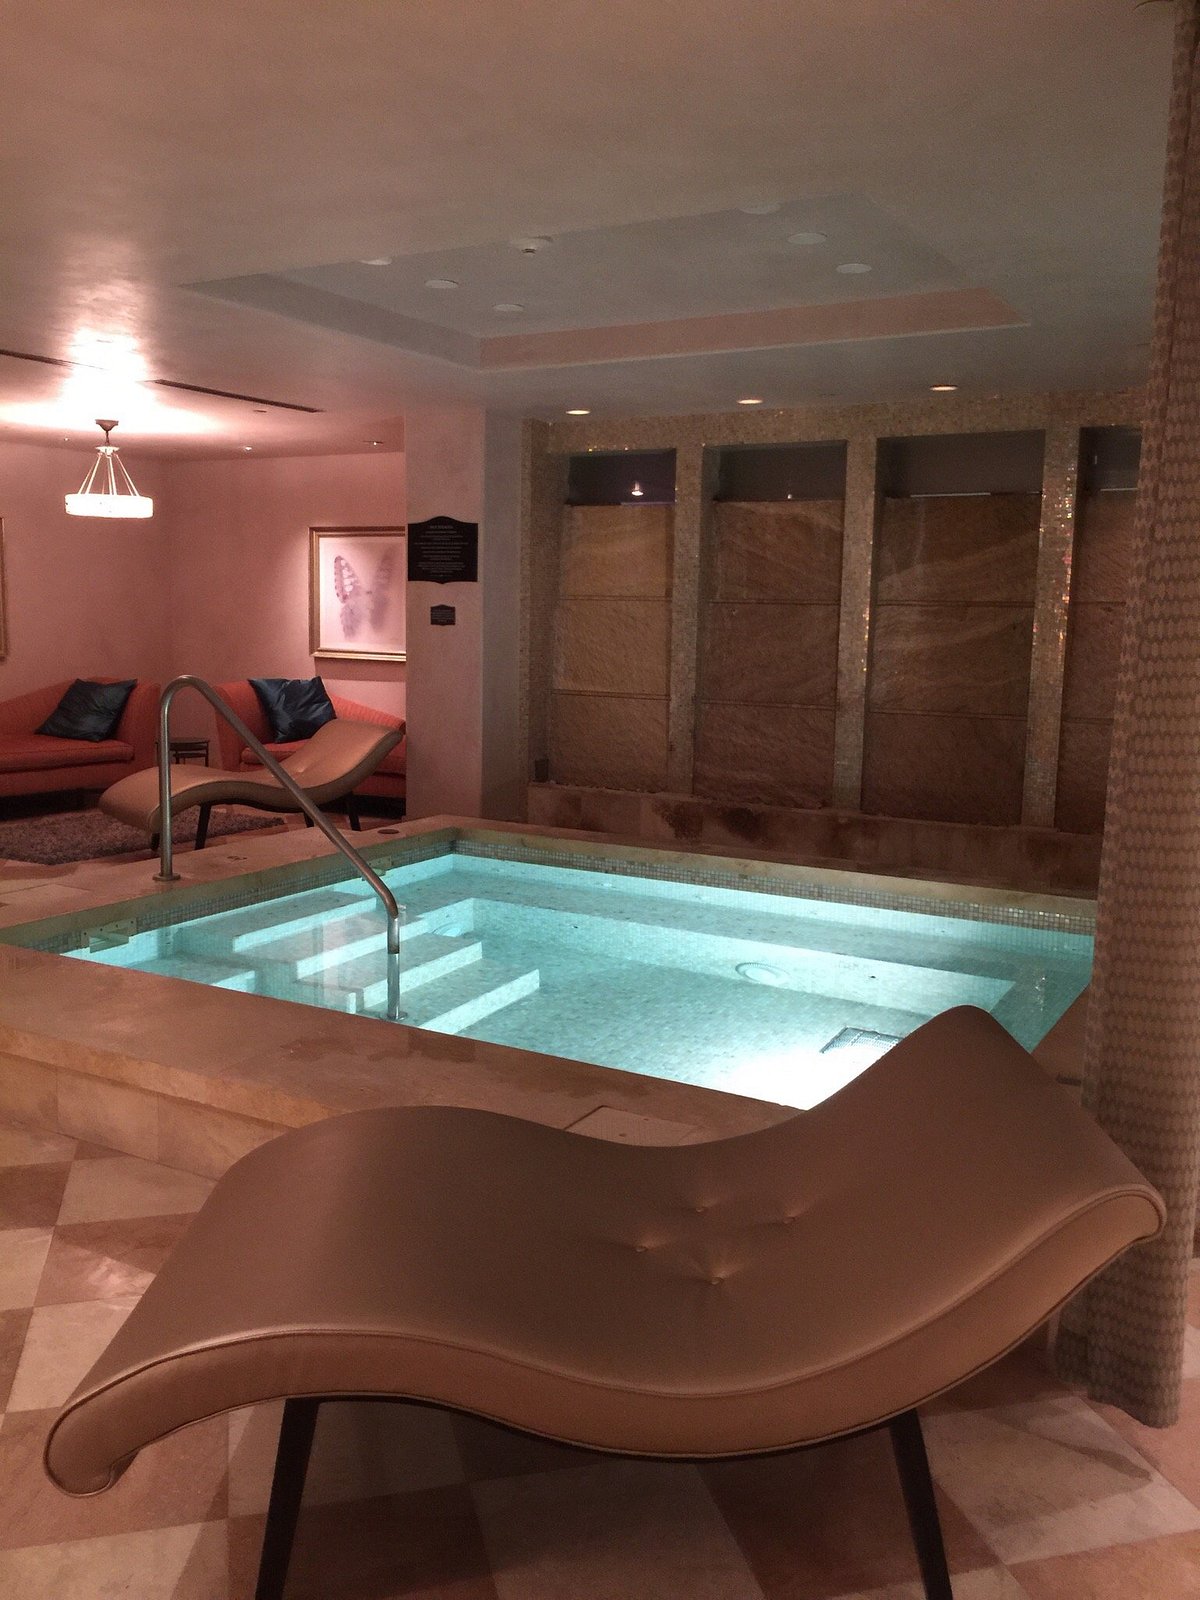 Spa at The Arrabelle at Vail Square